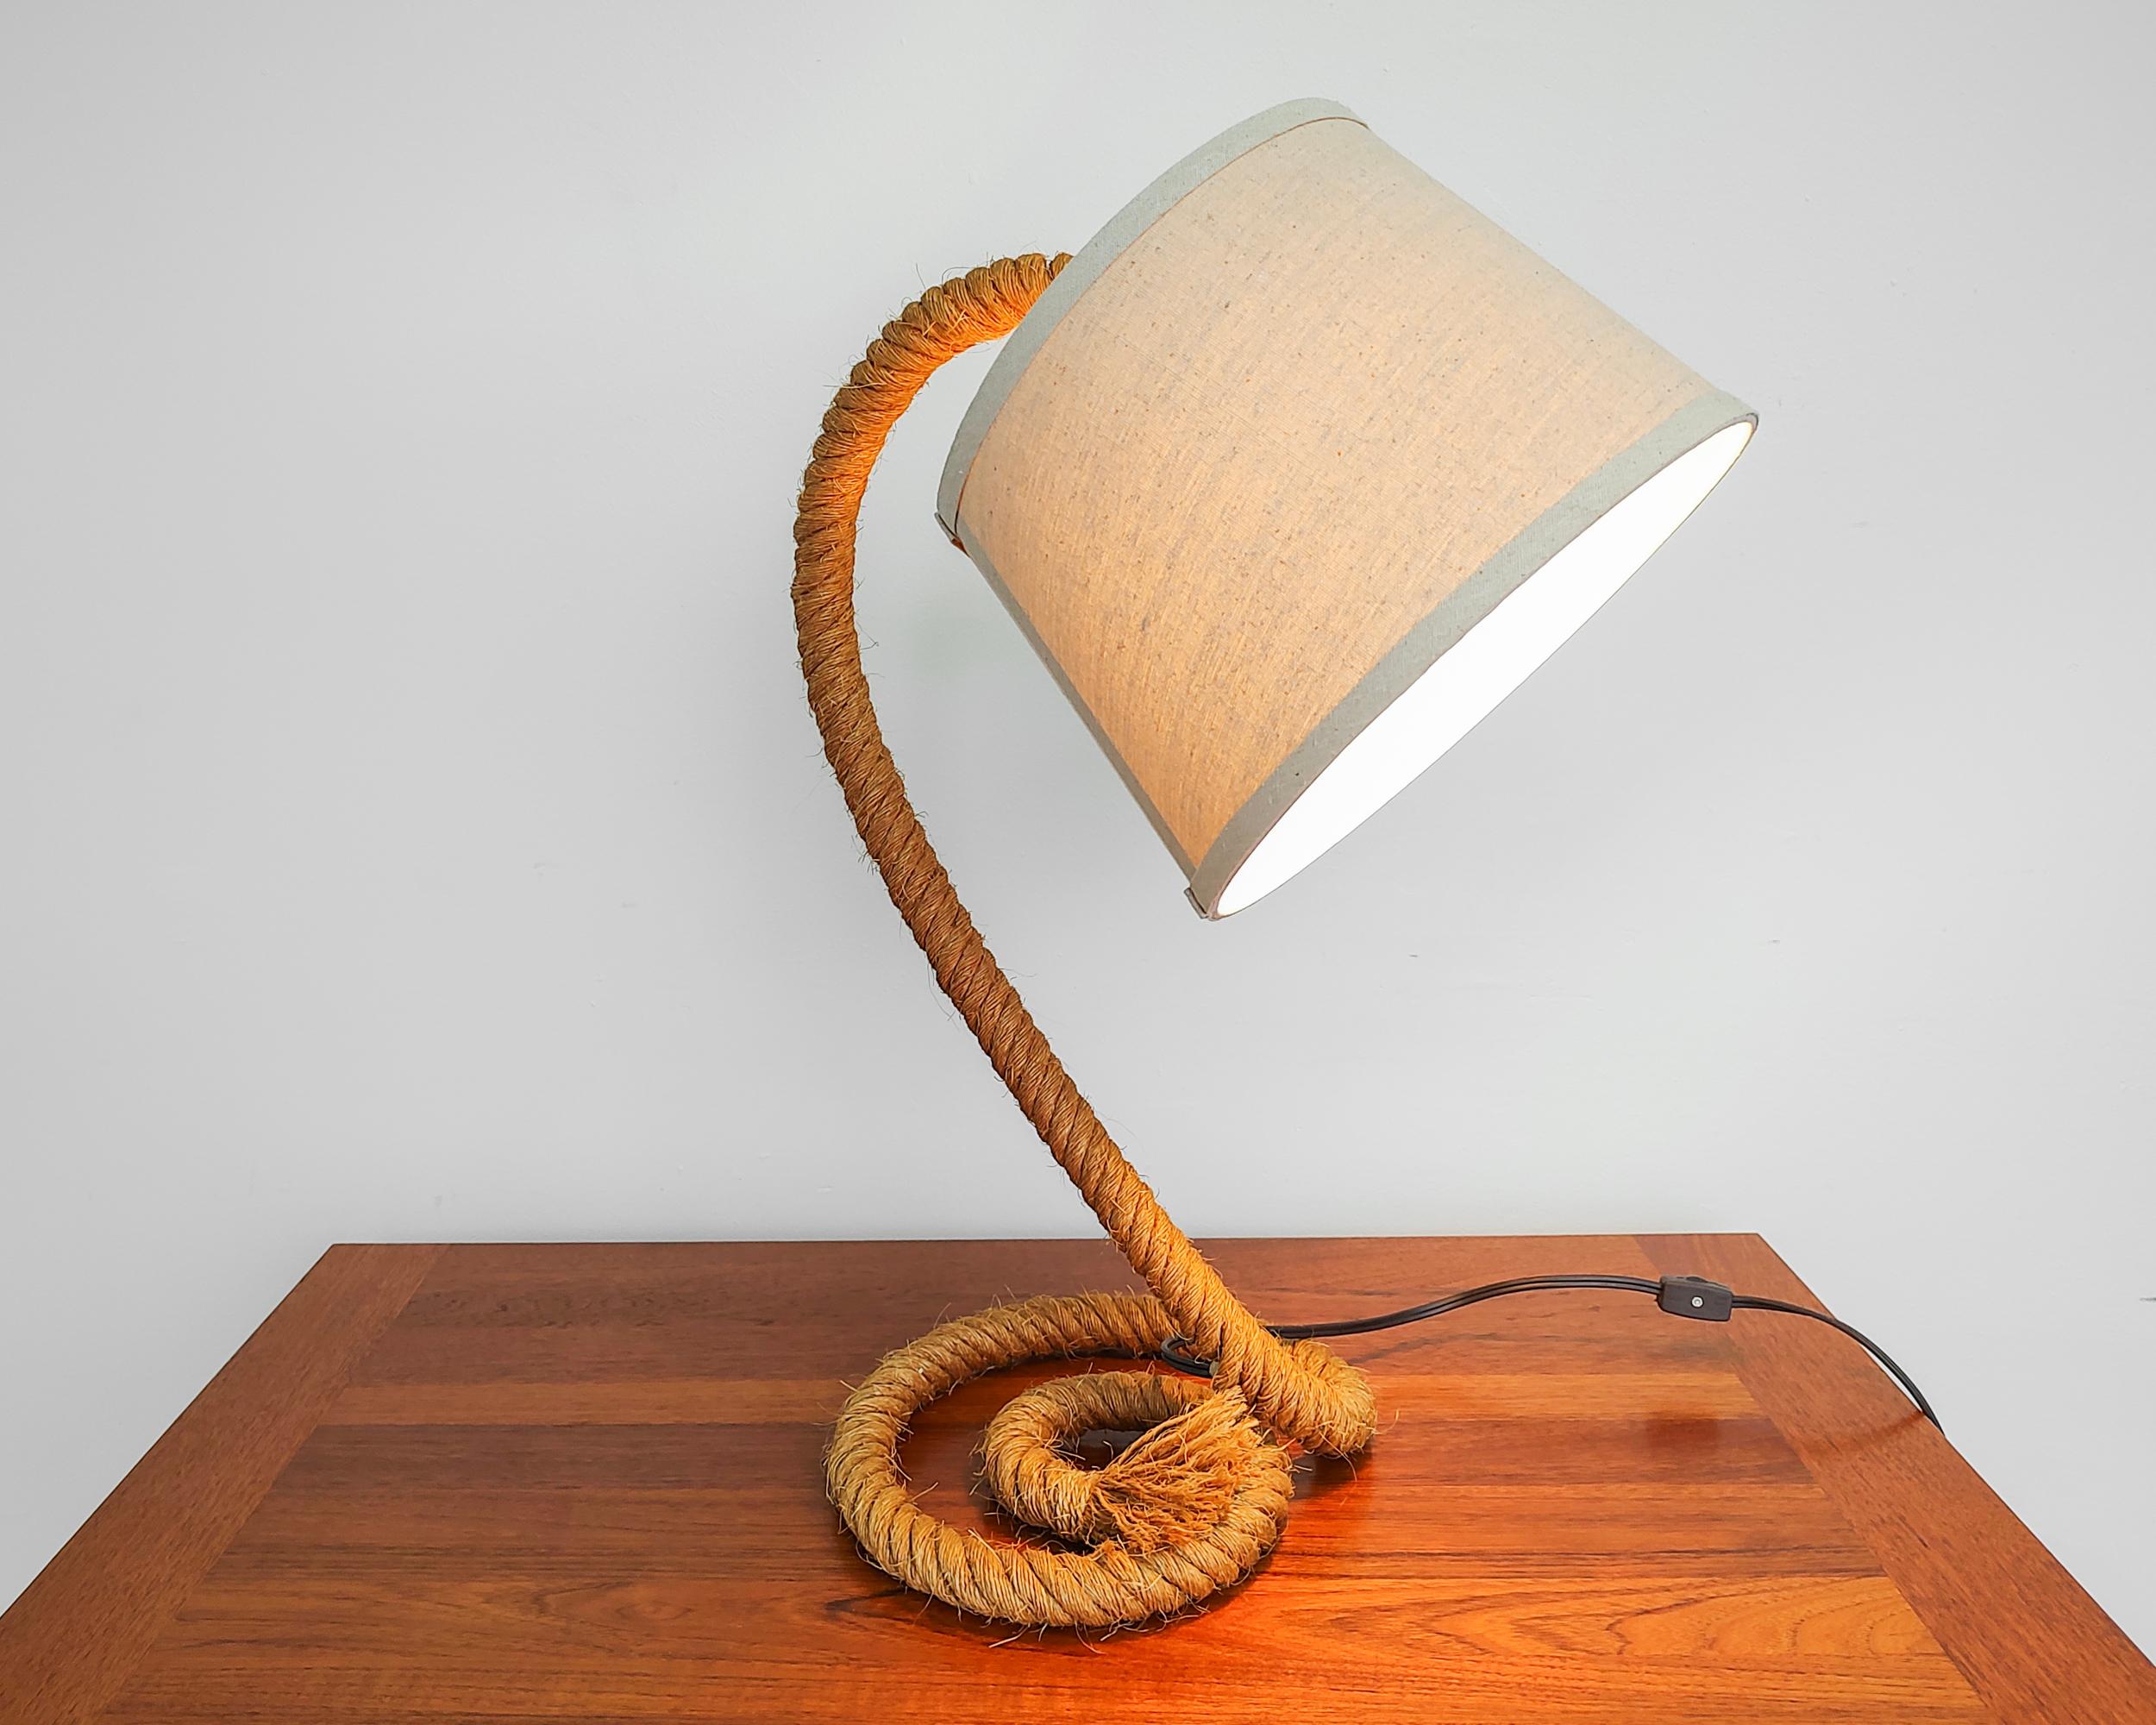 Vintage rope table lamp with linen shade. In the style of Adrien Audoux and Frida Minnet. Rotary on/off switch located on cord. Overall great vintage condition.

23.5